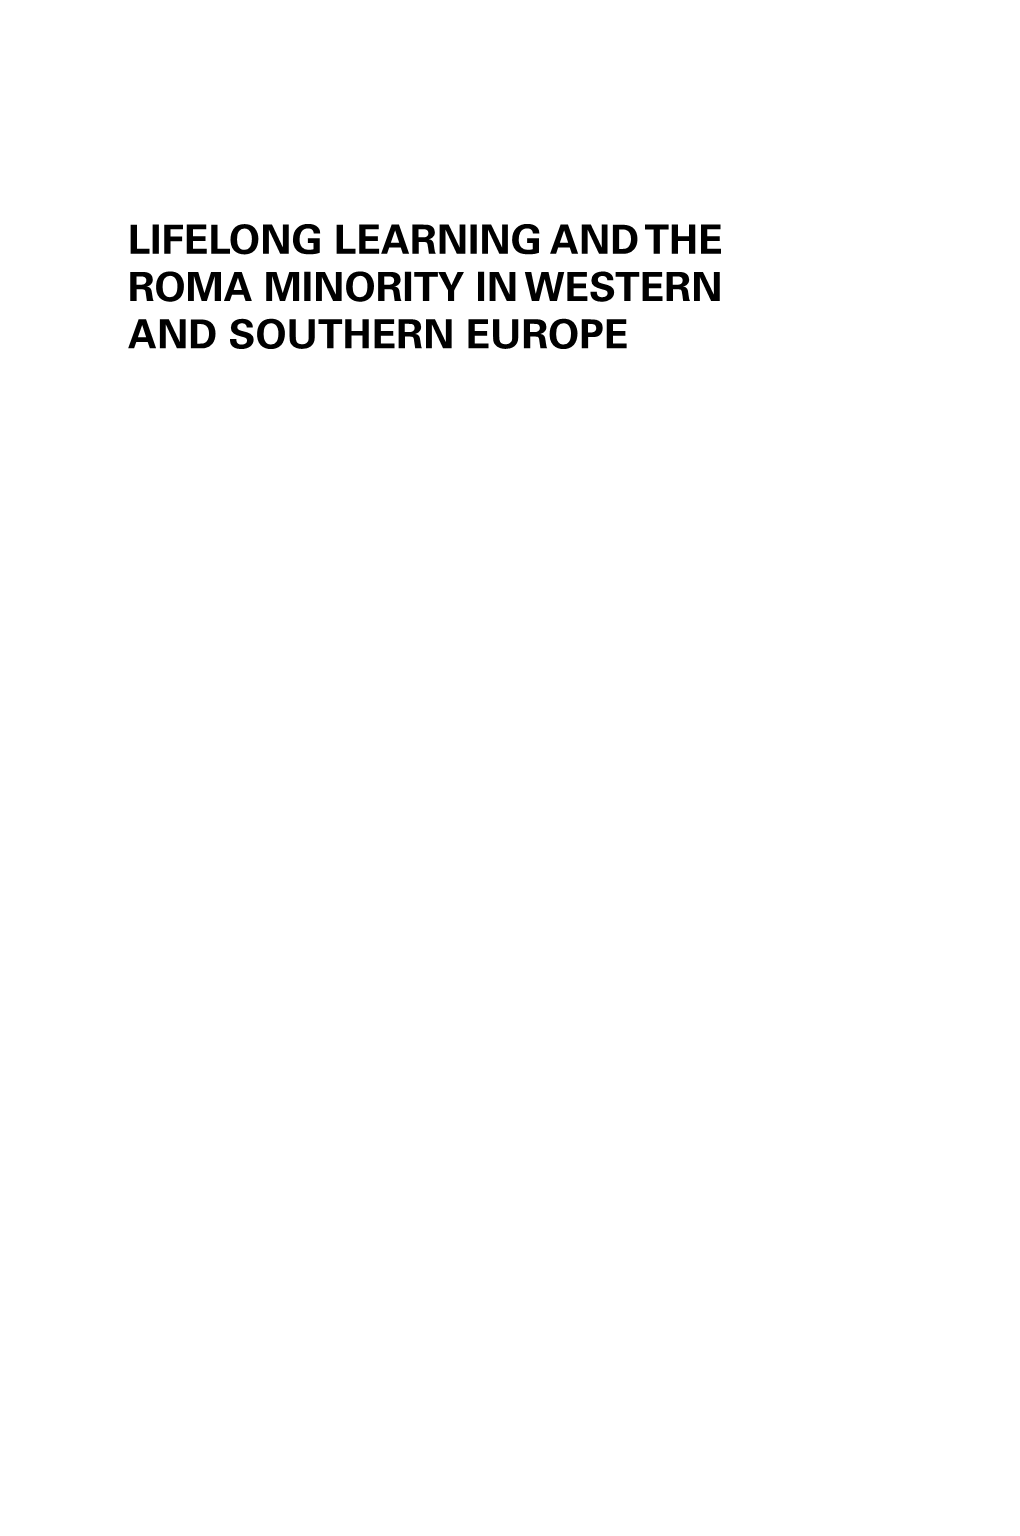 Lifelong Learning and the Roma Minority in Western and Southern